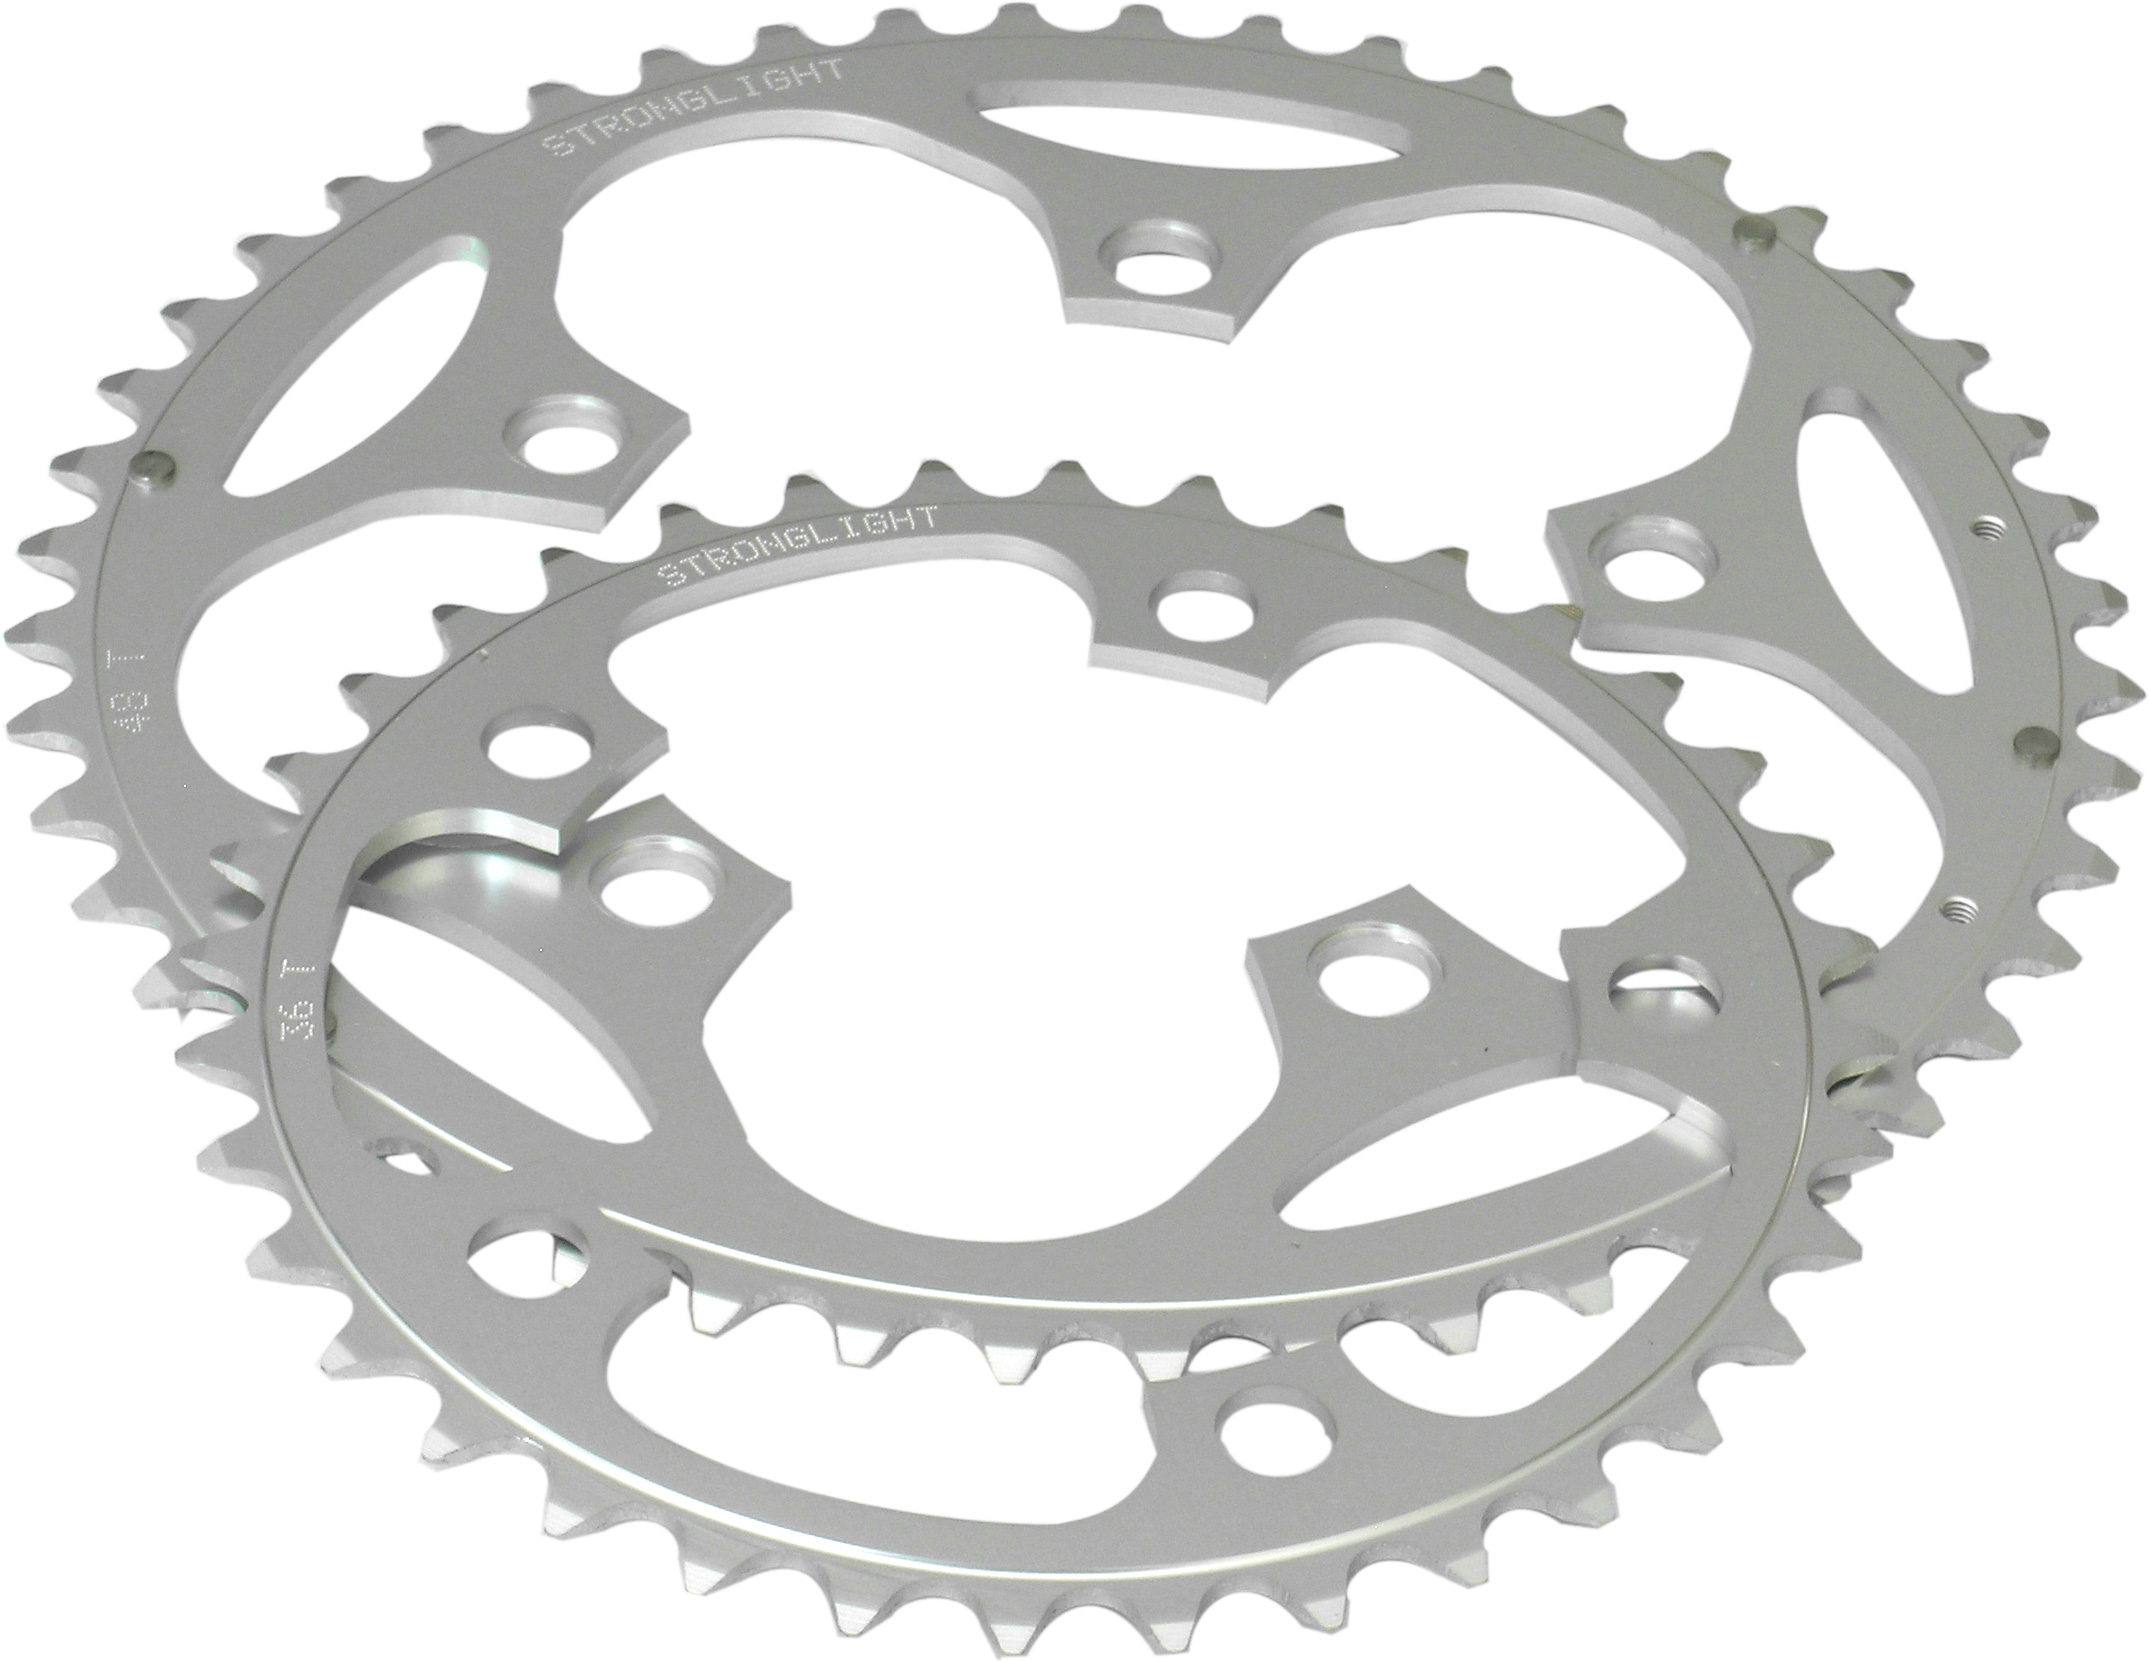 RD11040S Stronglight 40T Silver 5-Arm Alloy Chainring